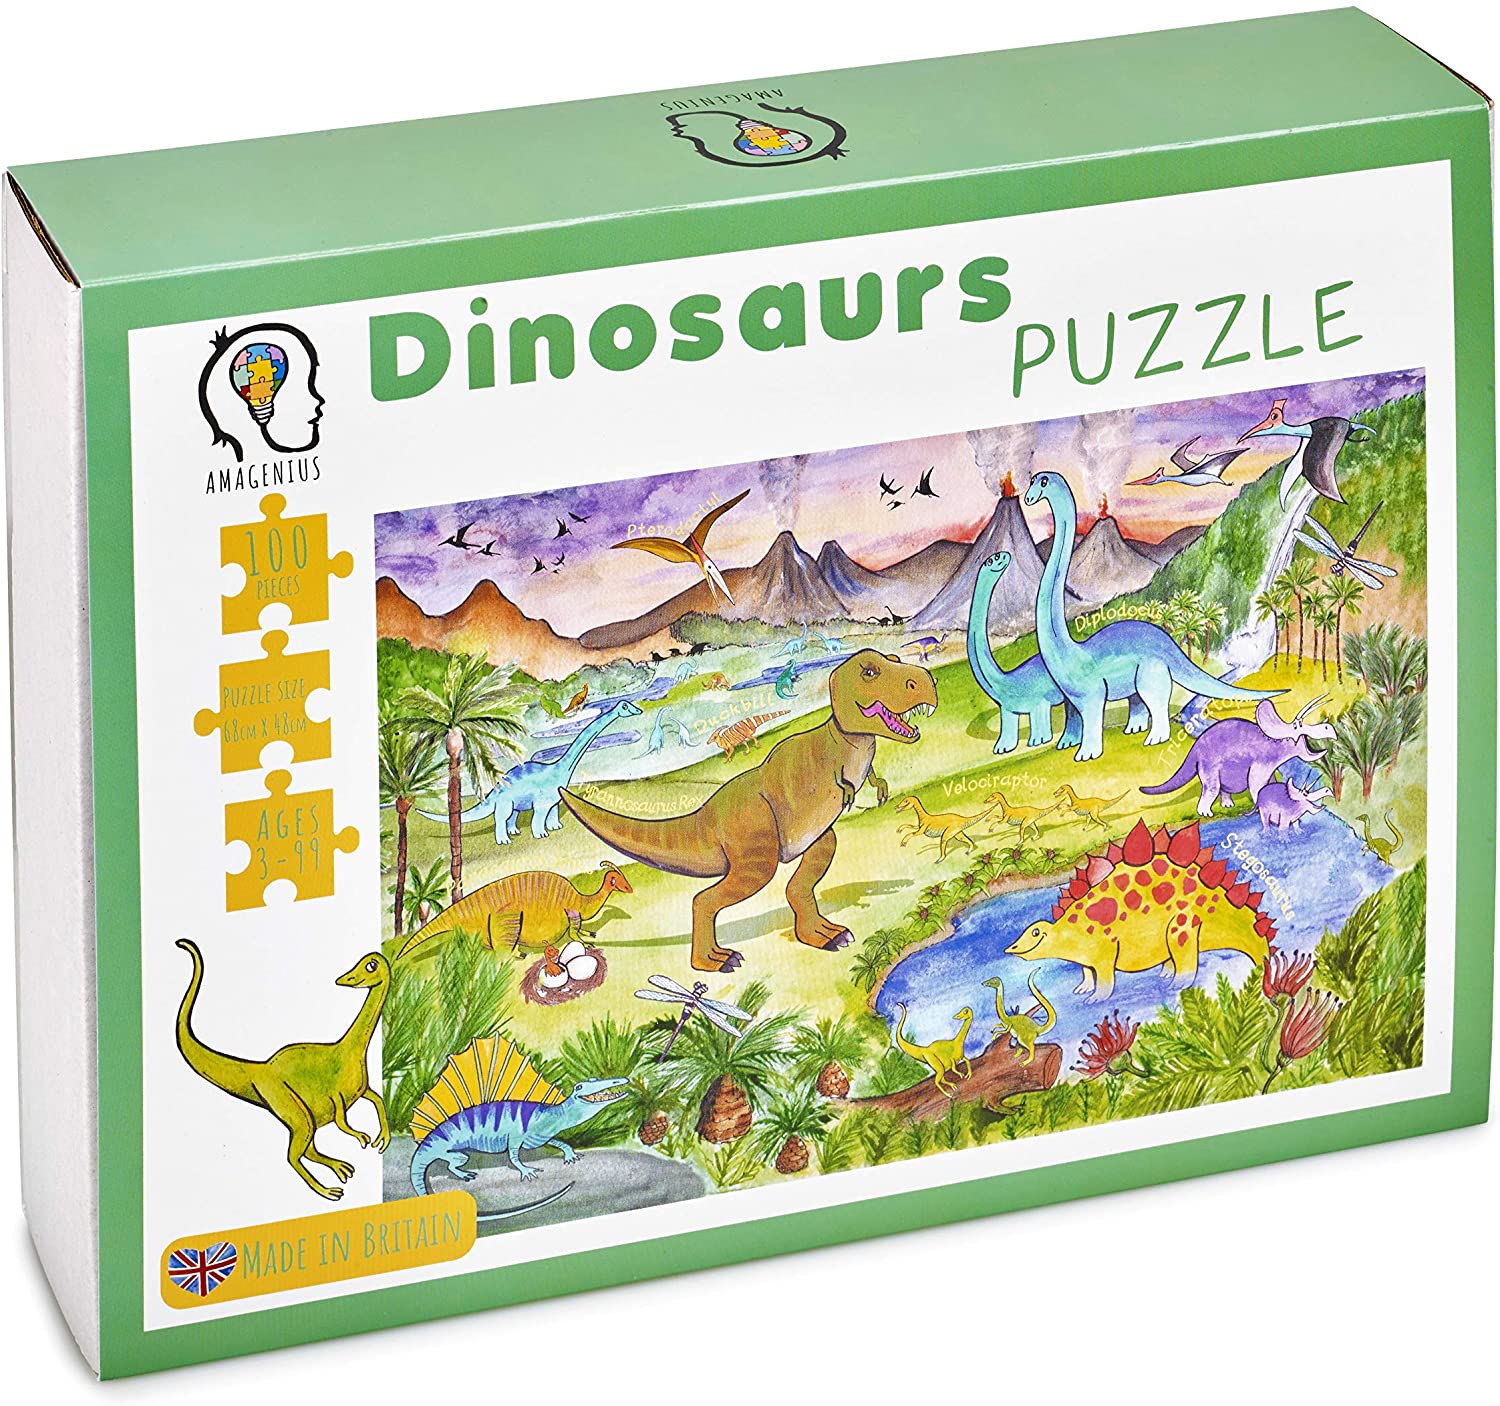 Amagenius Dinosaur Floor Puzzle with Great Thick Pieces which can Also be Used on a Table 